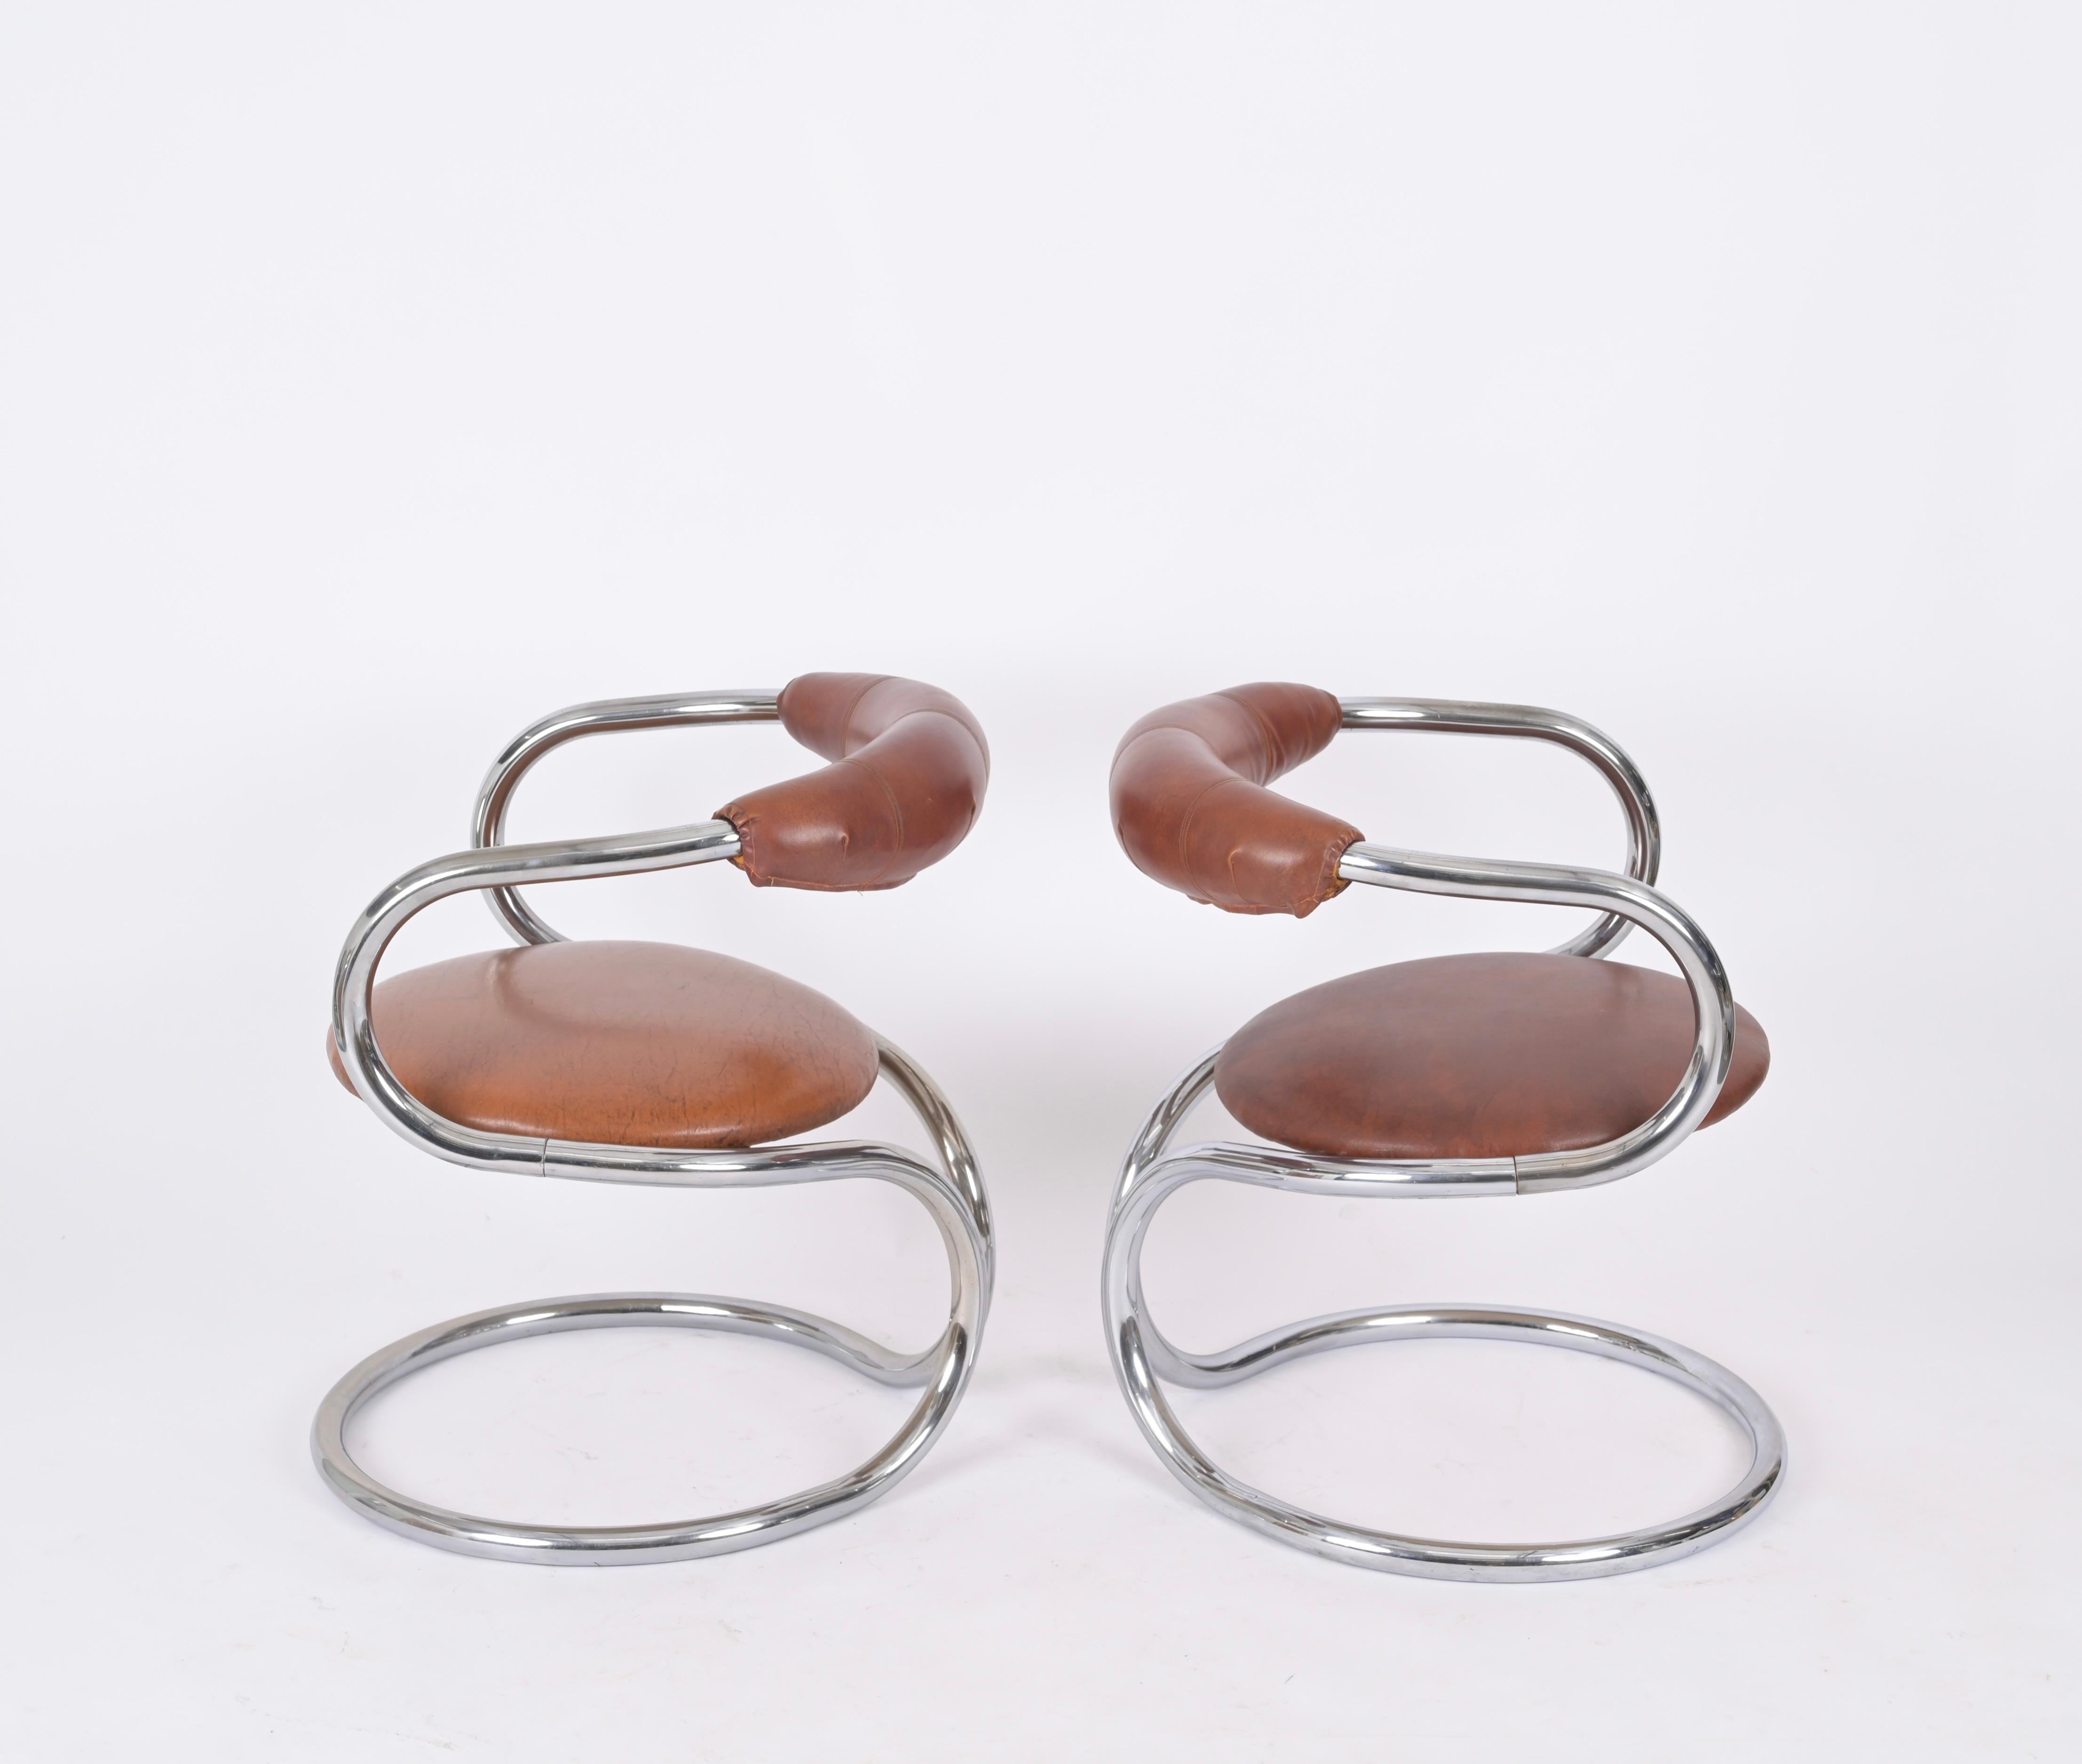 Marvelous set of two chromed steel and brown leather chairs. Giotto Stoppino designed these chairs during the 1970s in Italy.

This stylish Chairs have a wonderful tubular structure in chromed steel with a rounded, symmetrical shape. 
Both the